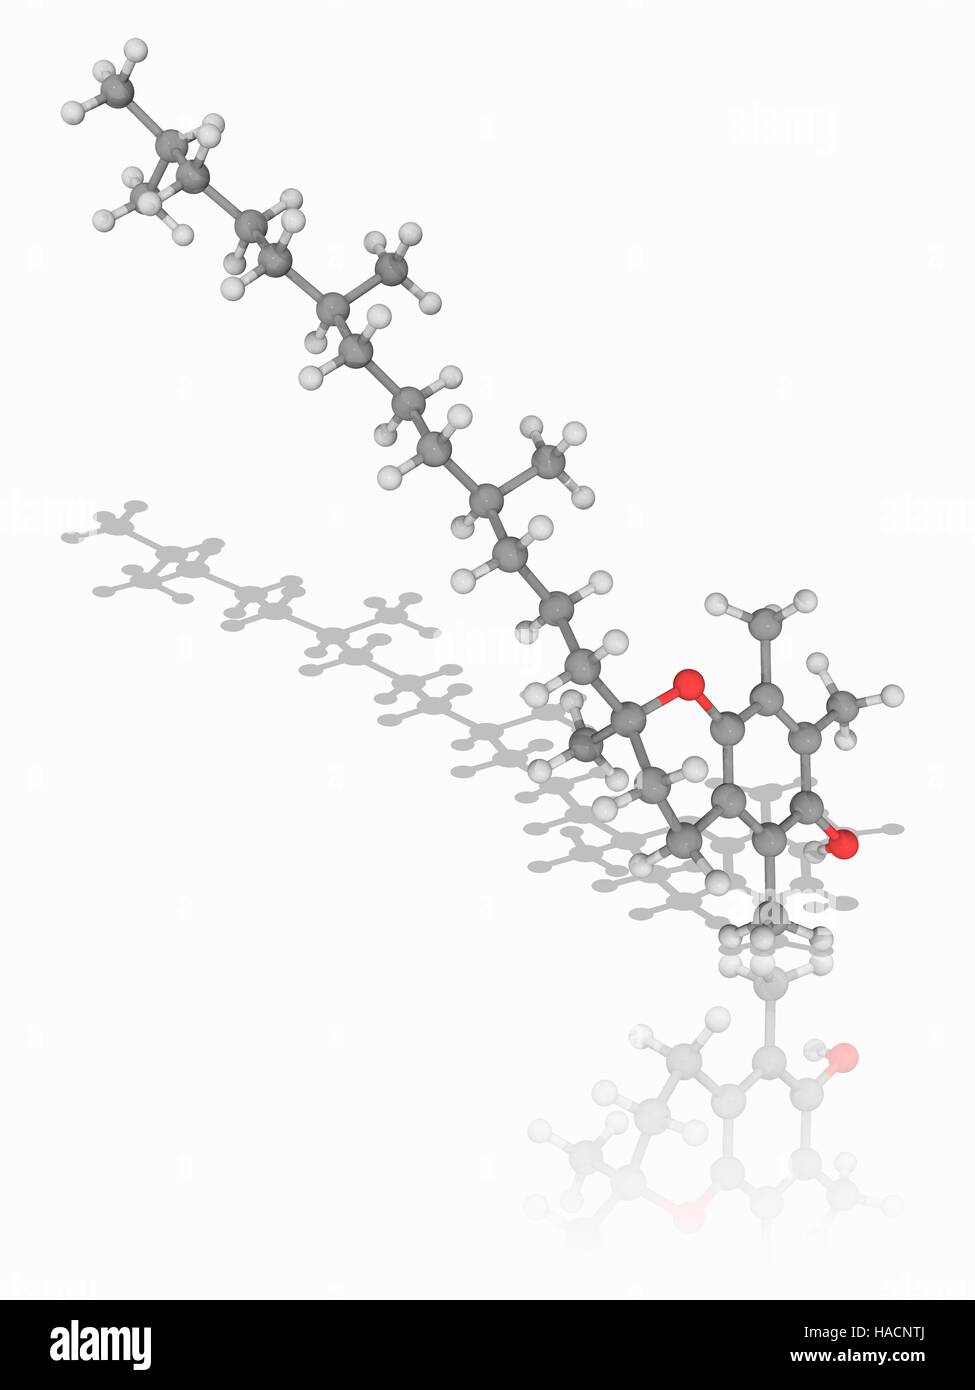 Vitamin E. Molecular model of alpha-tocopherol (C29.H50.O2), the most biologically active form of vitamin E. Deficiency of this vitamin leads to neuromuscular problems. Atoms are represented as spheres and are colour-coded: carbon (grey), hydrogen (white) and oxygen (red). Illustration. Stock Photo